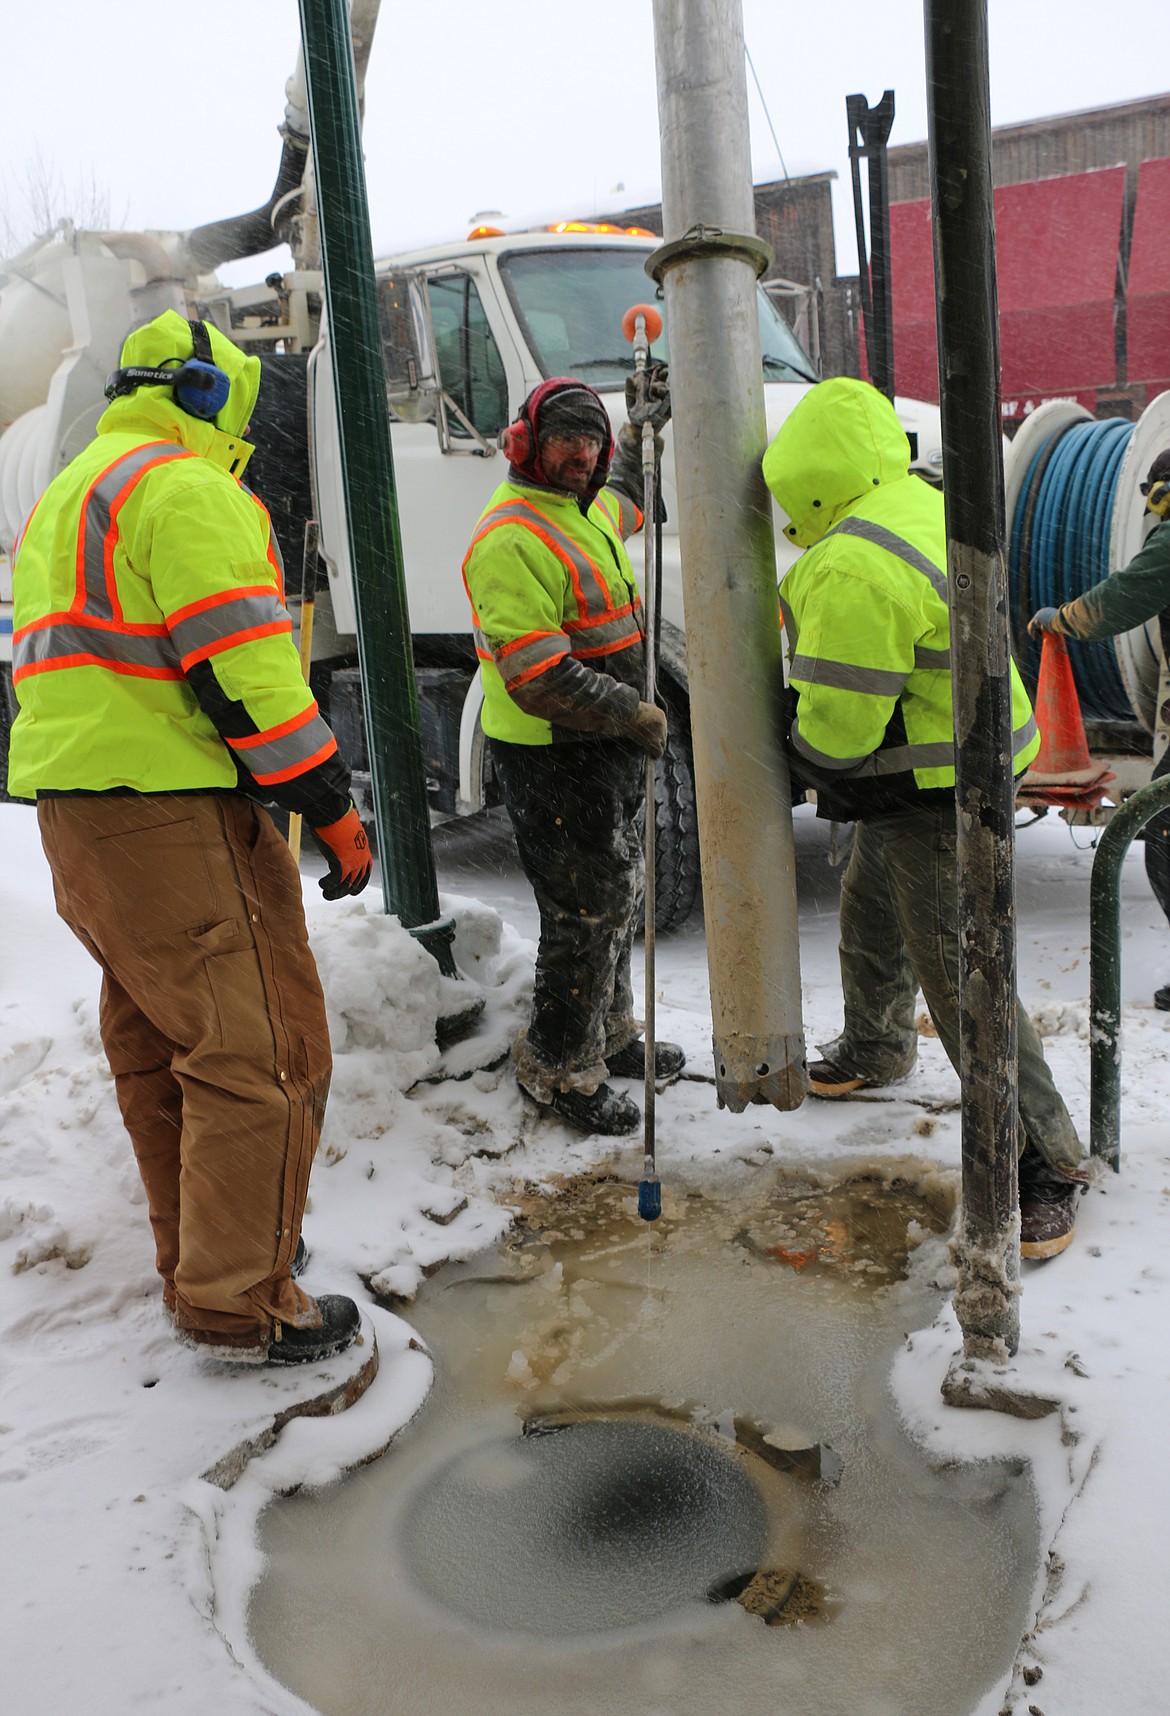 Sandpoint crews work to fix a service line break in downtown Sandpoint Friday morning. Thought to have been caused by frozen pipes, the service line break led to a flooded street and water being shut off to some businesses until repairs could be made.